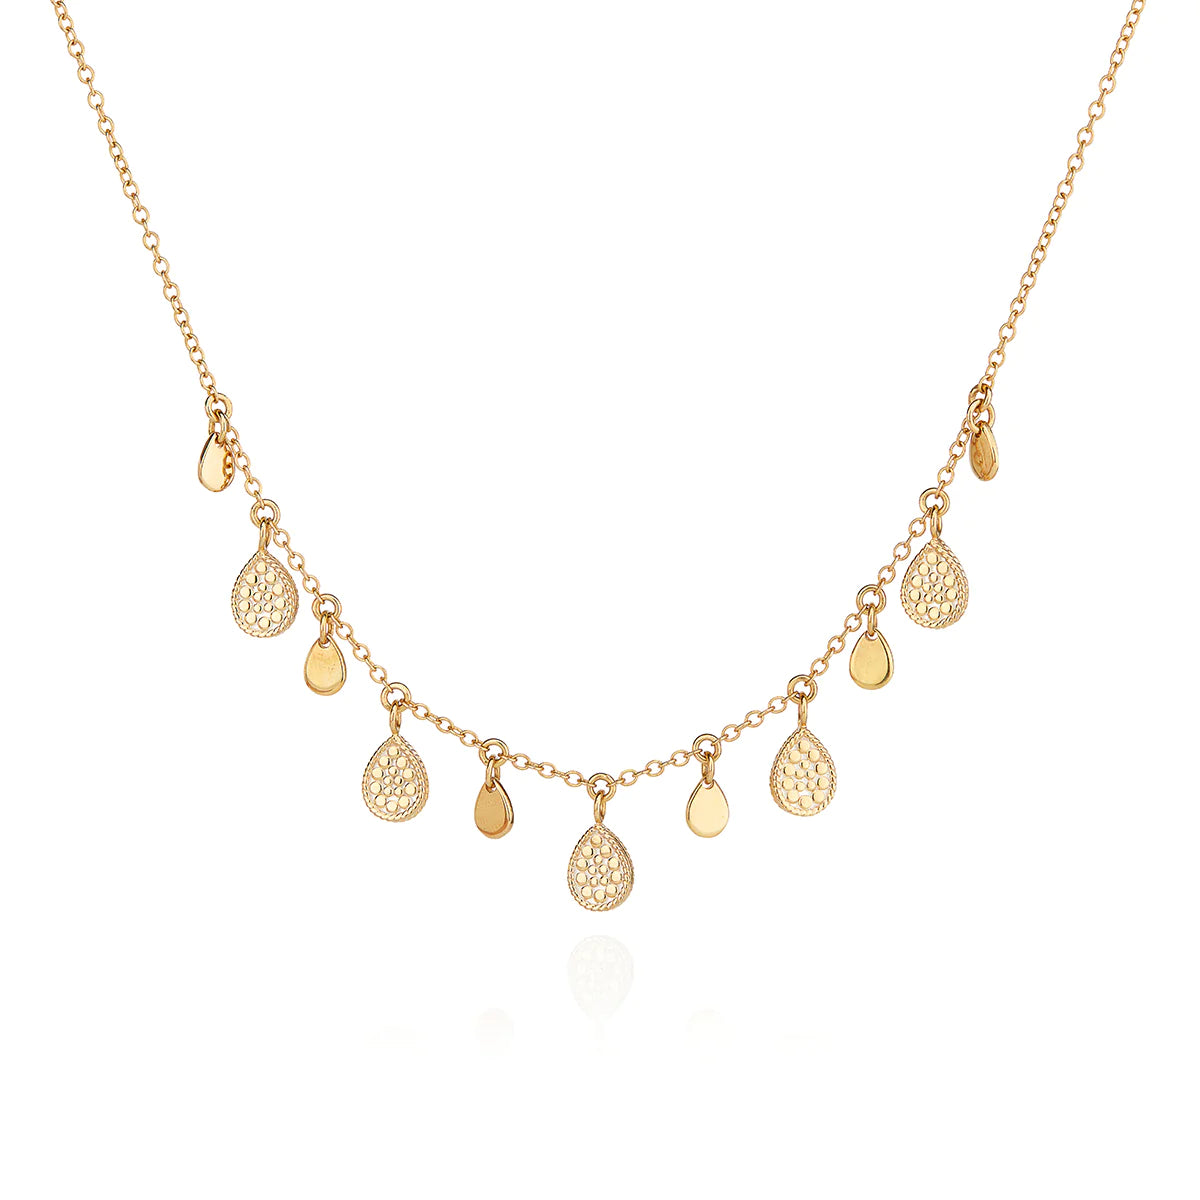 anna-beck-teardrop-charm-collar-necklace-in-gold-4251ng-gld